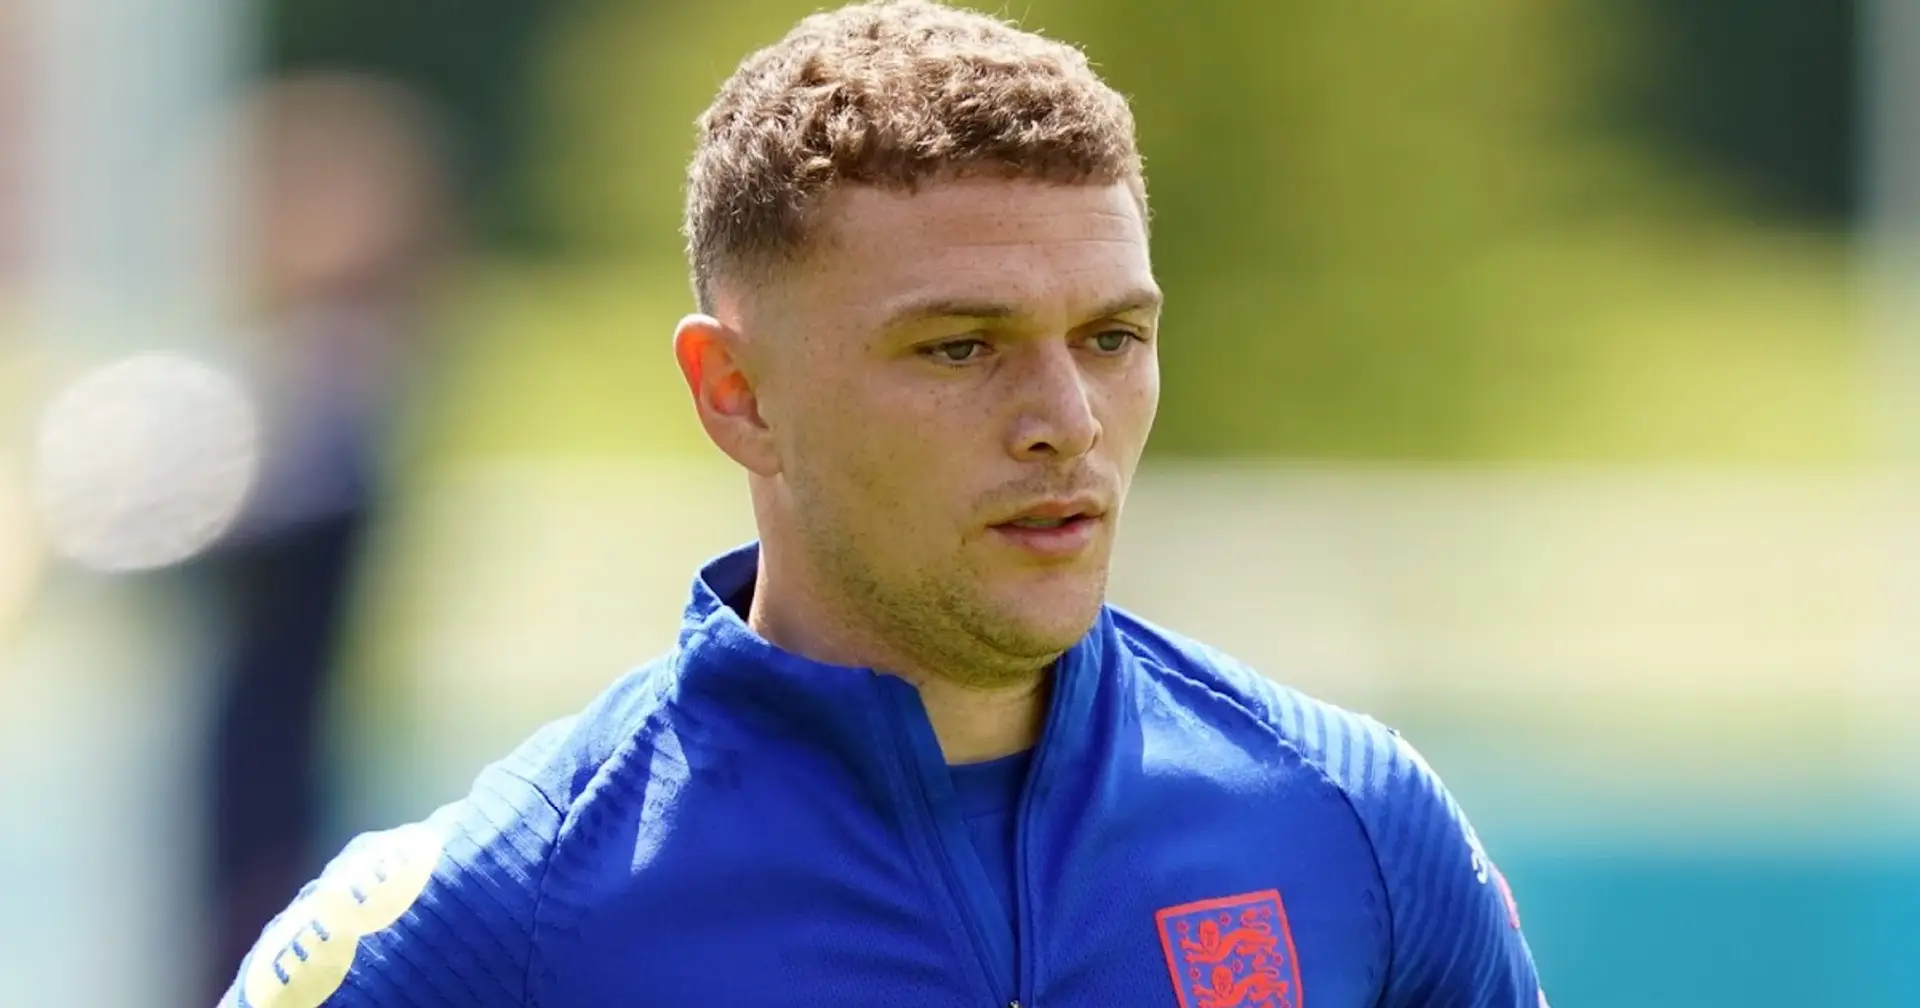 Kieran Trippier 'expects' Man United move to happen this summer (reliability: 4 stars)